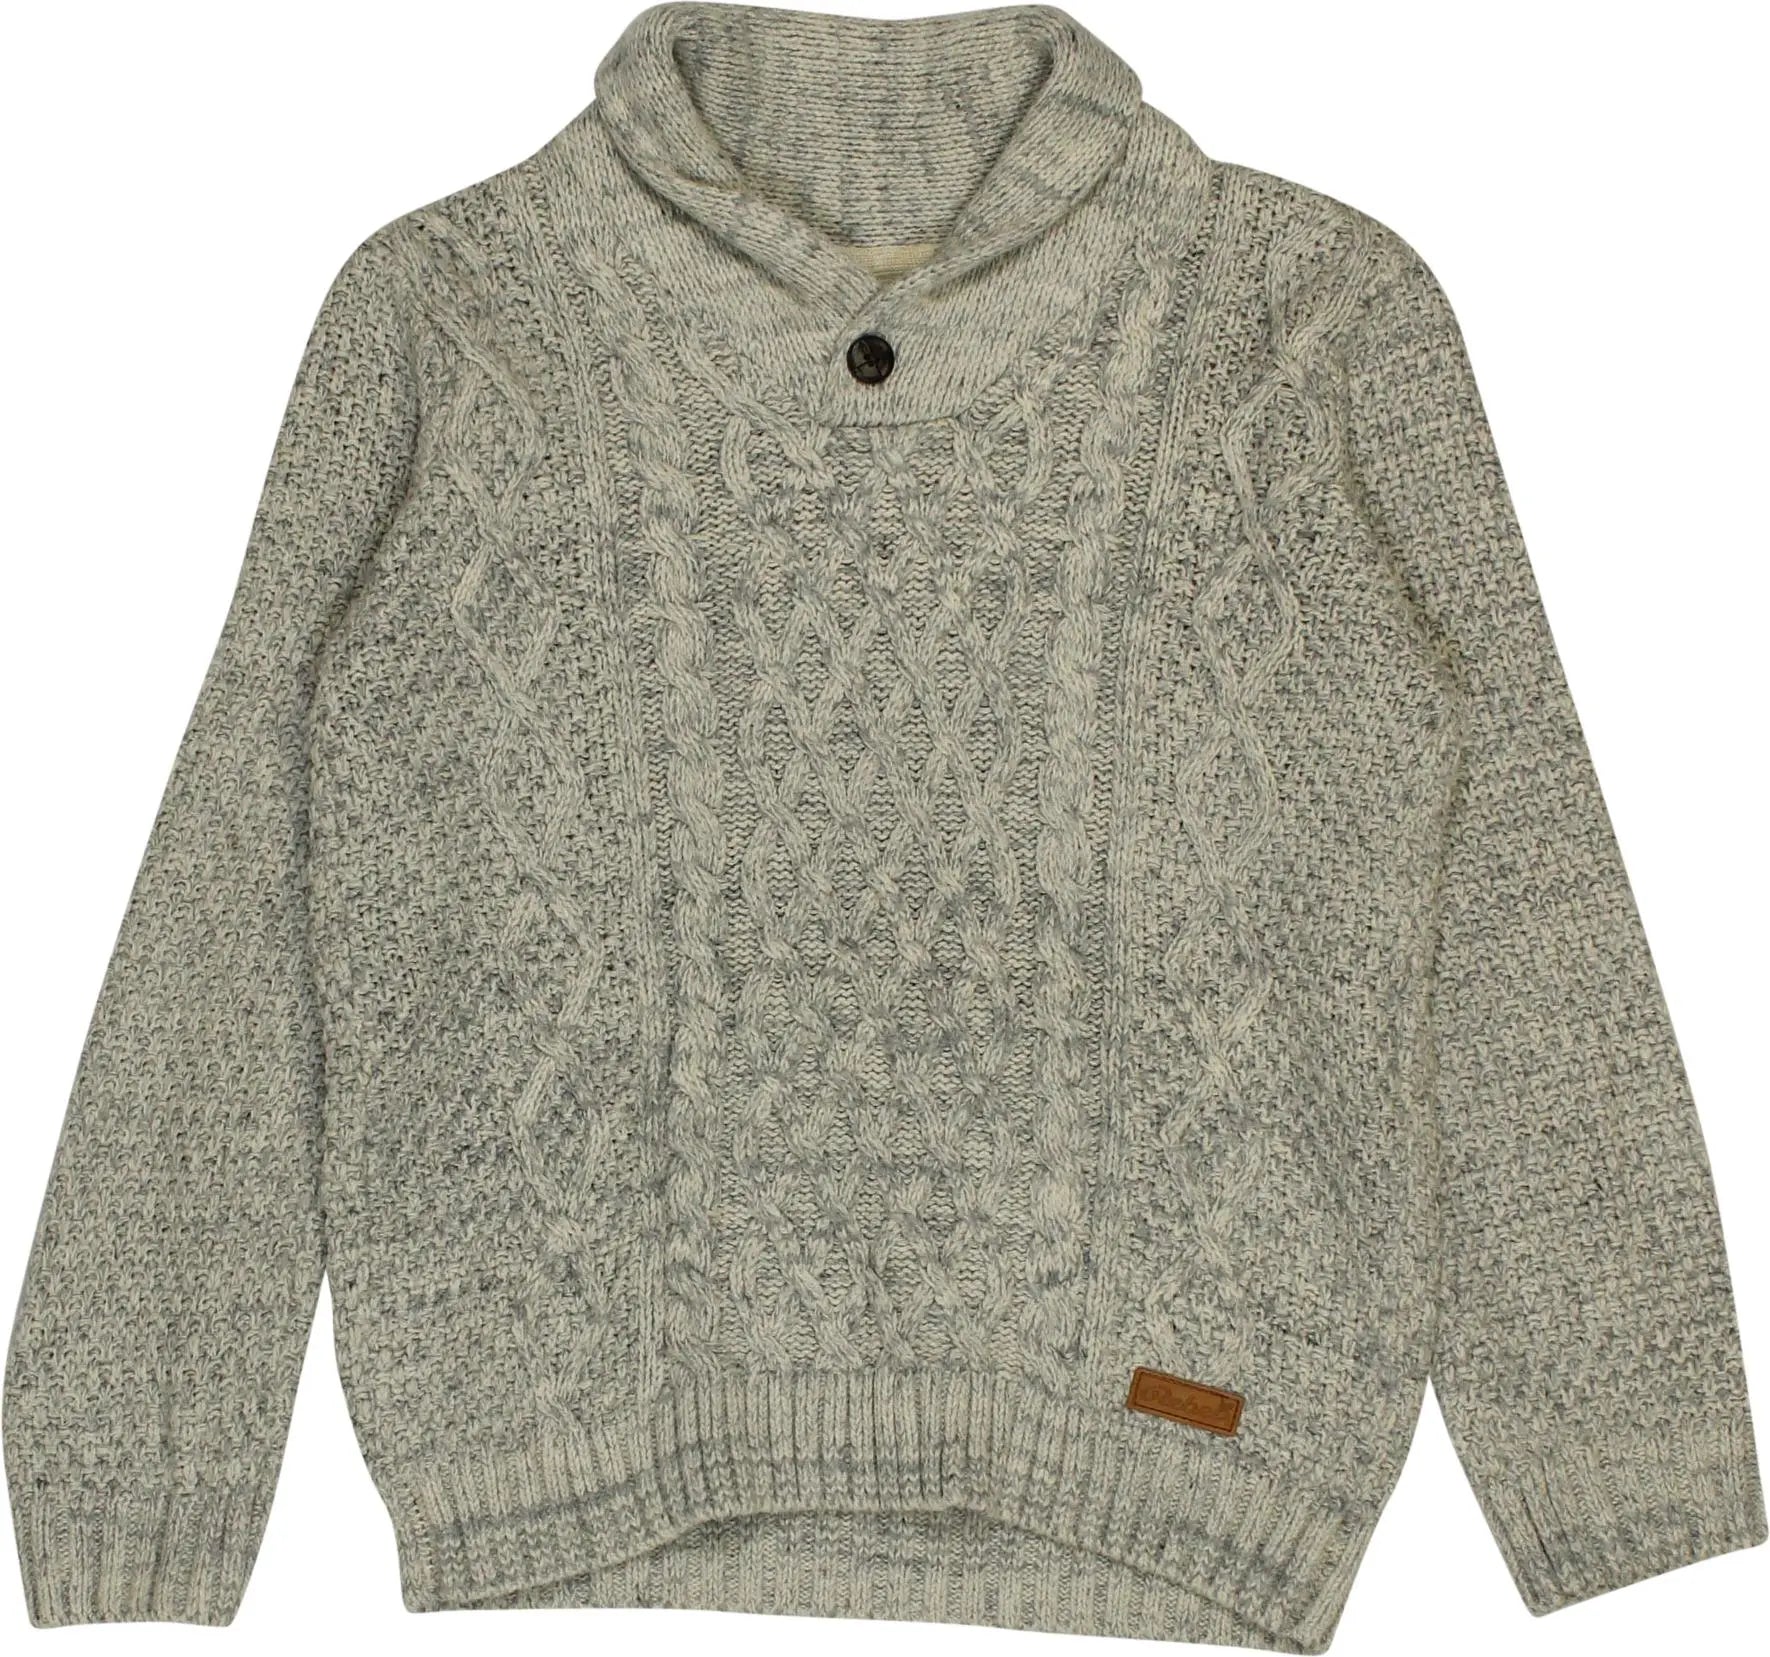 Primark - Grey Knitted Jumper- ThriftTale.com - Vintage and second handclothing